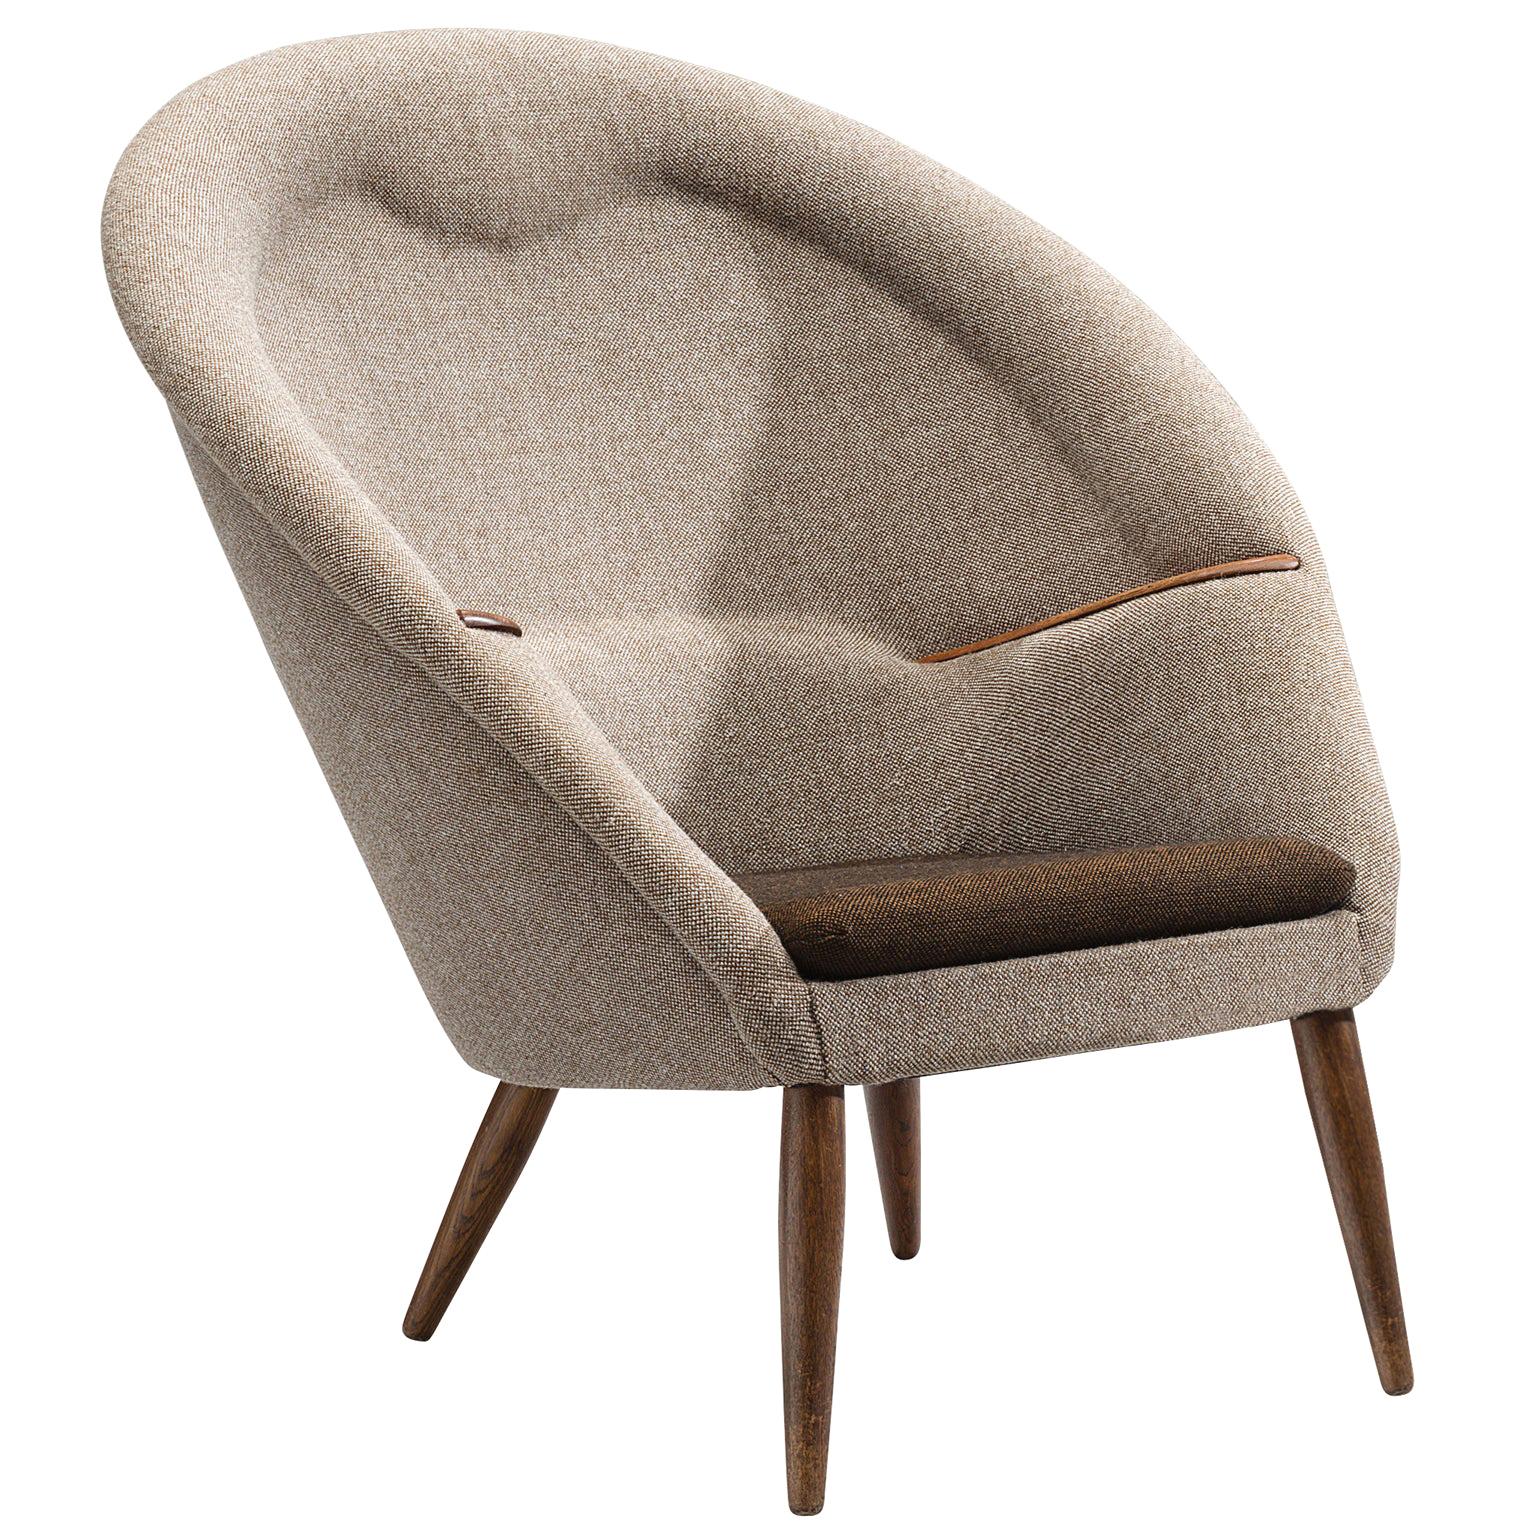 Nanna Ditzel Recently Upholstered 'Oda-Chair'